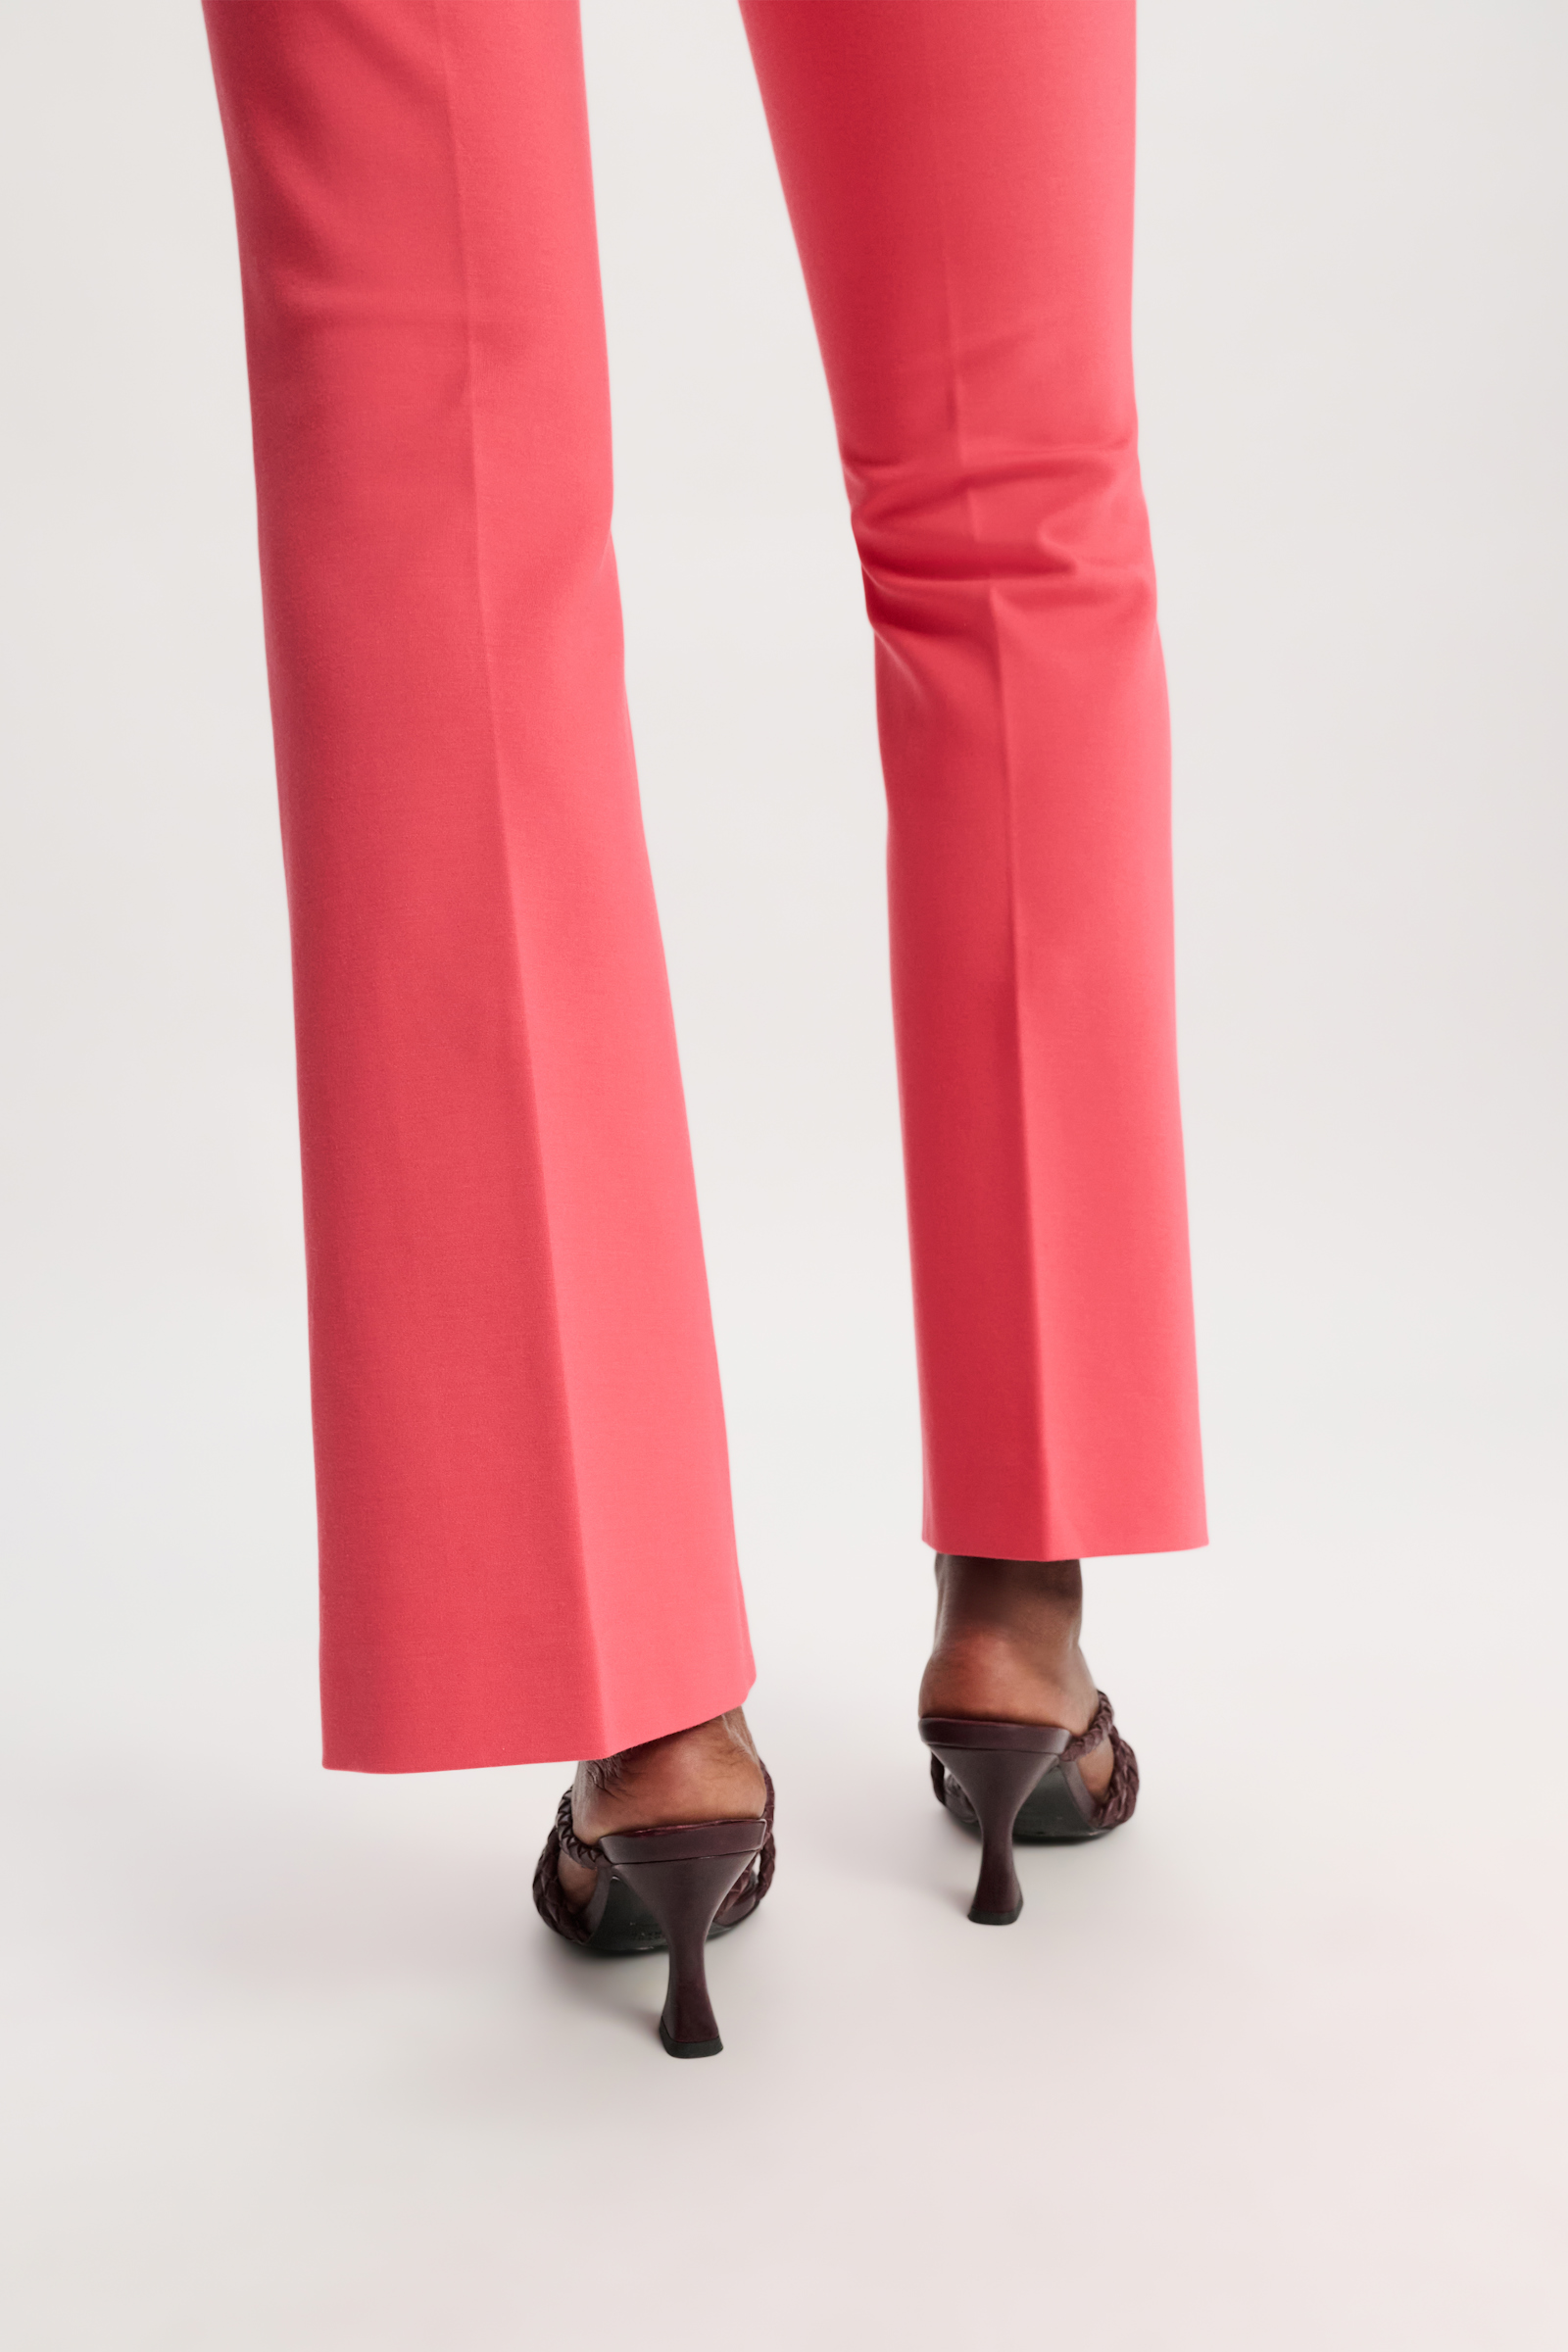 Dorothee Schumacher Cropped flared pants in Punto Milano with Western details medium coral